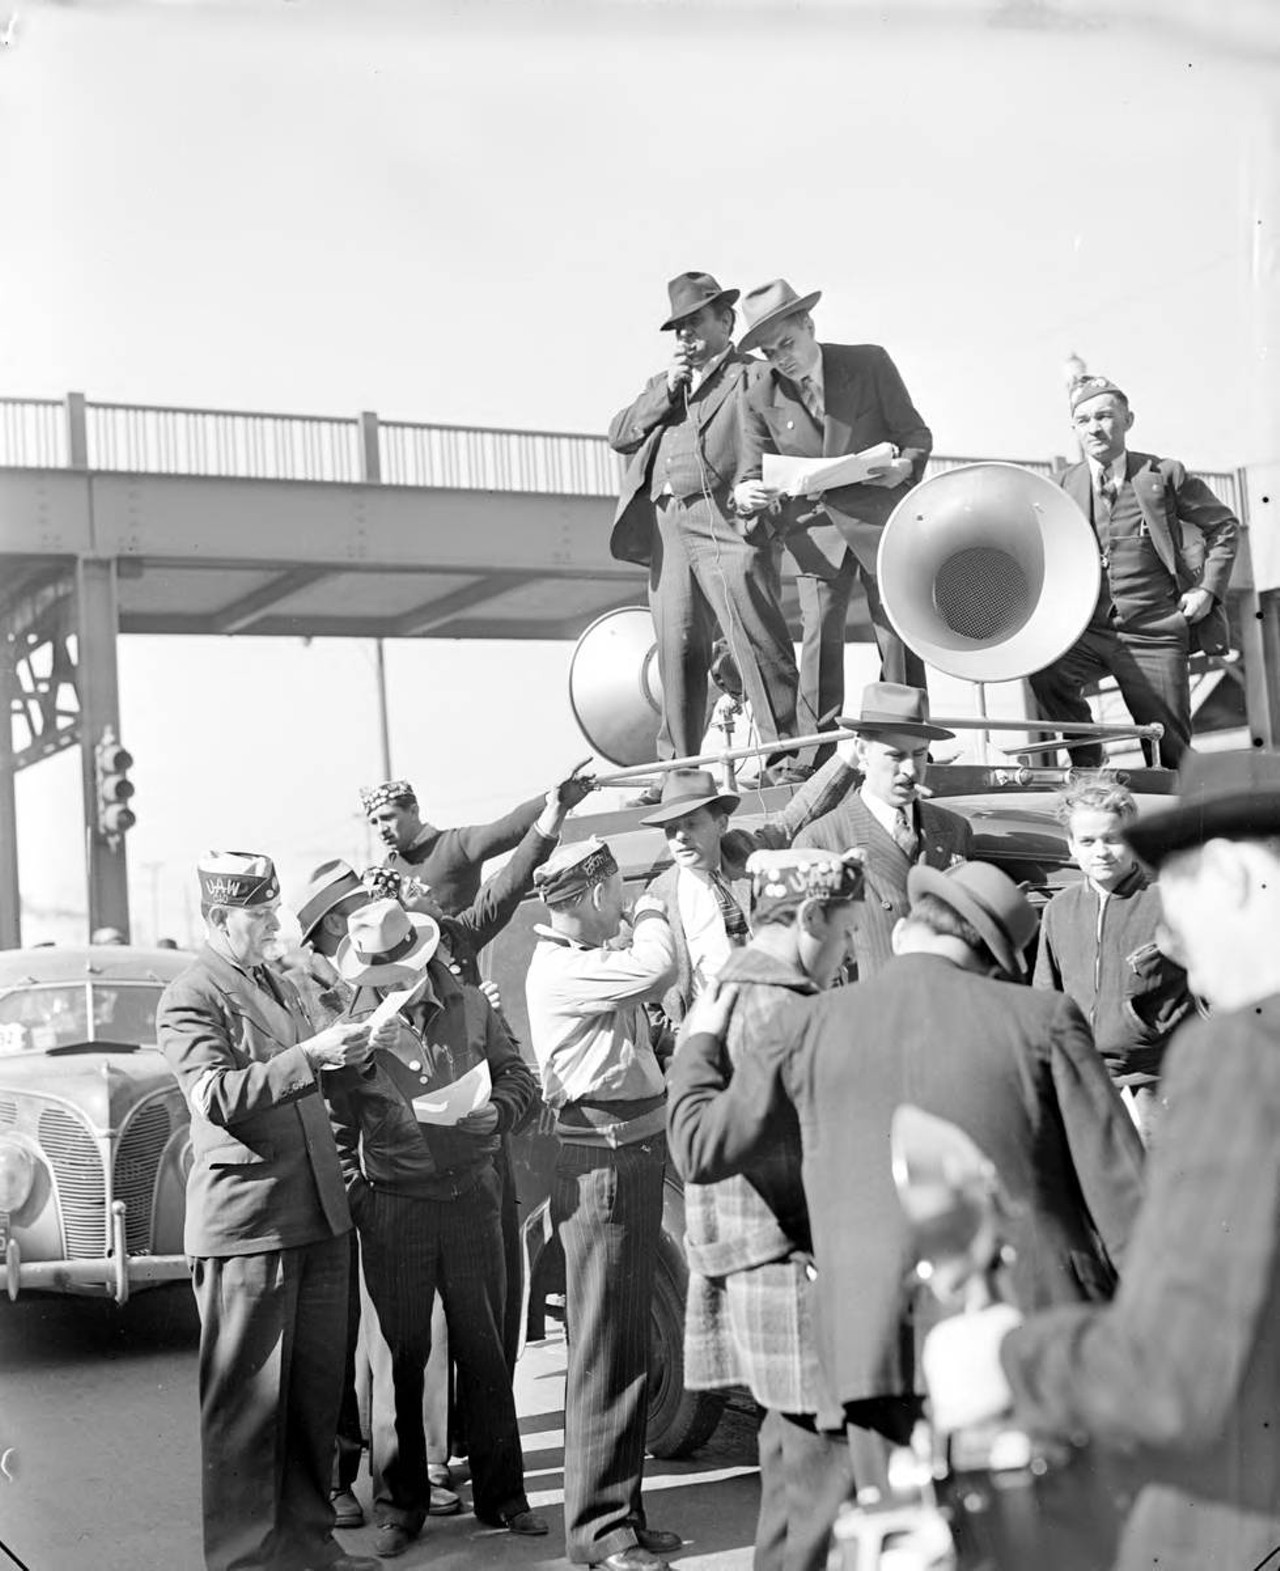 
April 11, 1941: Strike ends! A man stands on top of an automobile and speaks through loudspeakers as a group of men stand on the ground near the car, some wearing UAW hats.